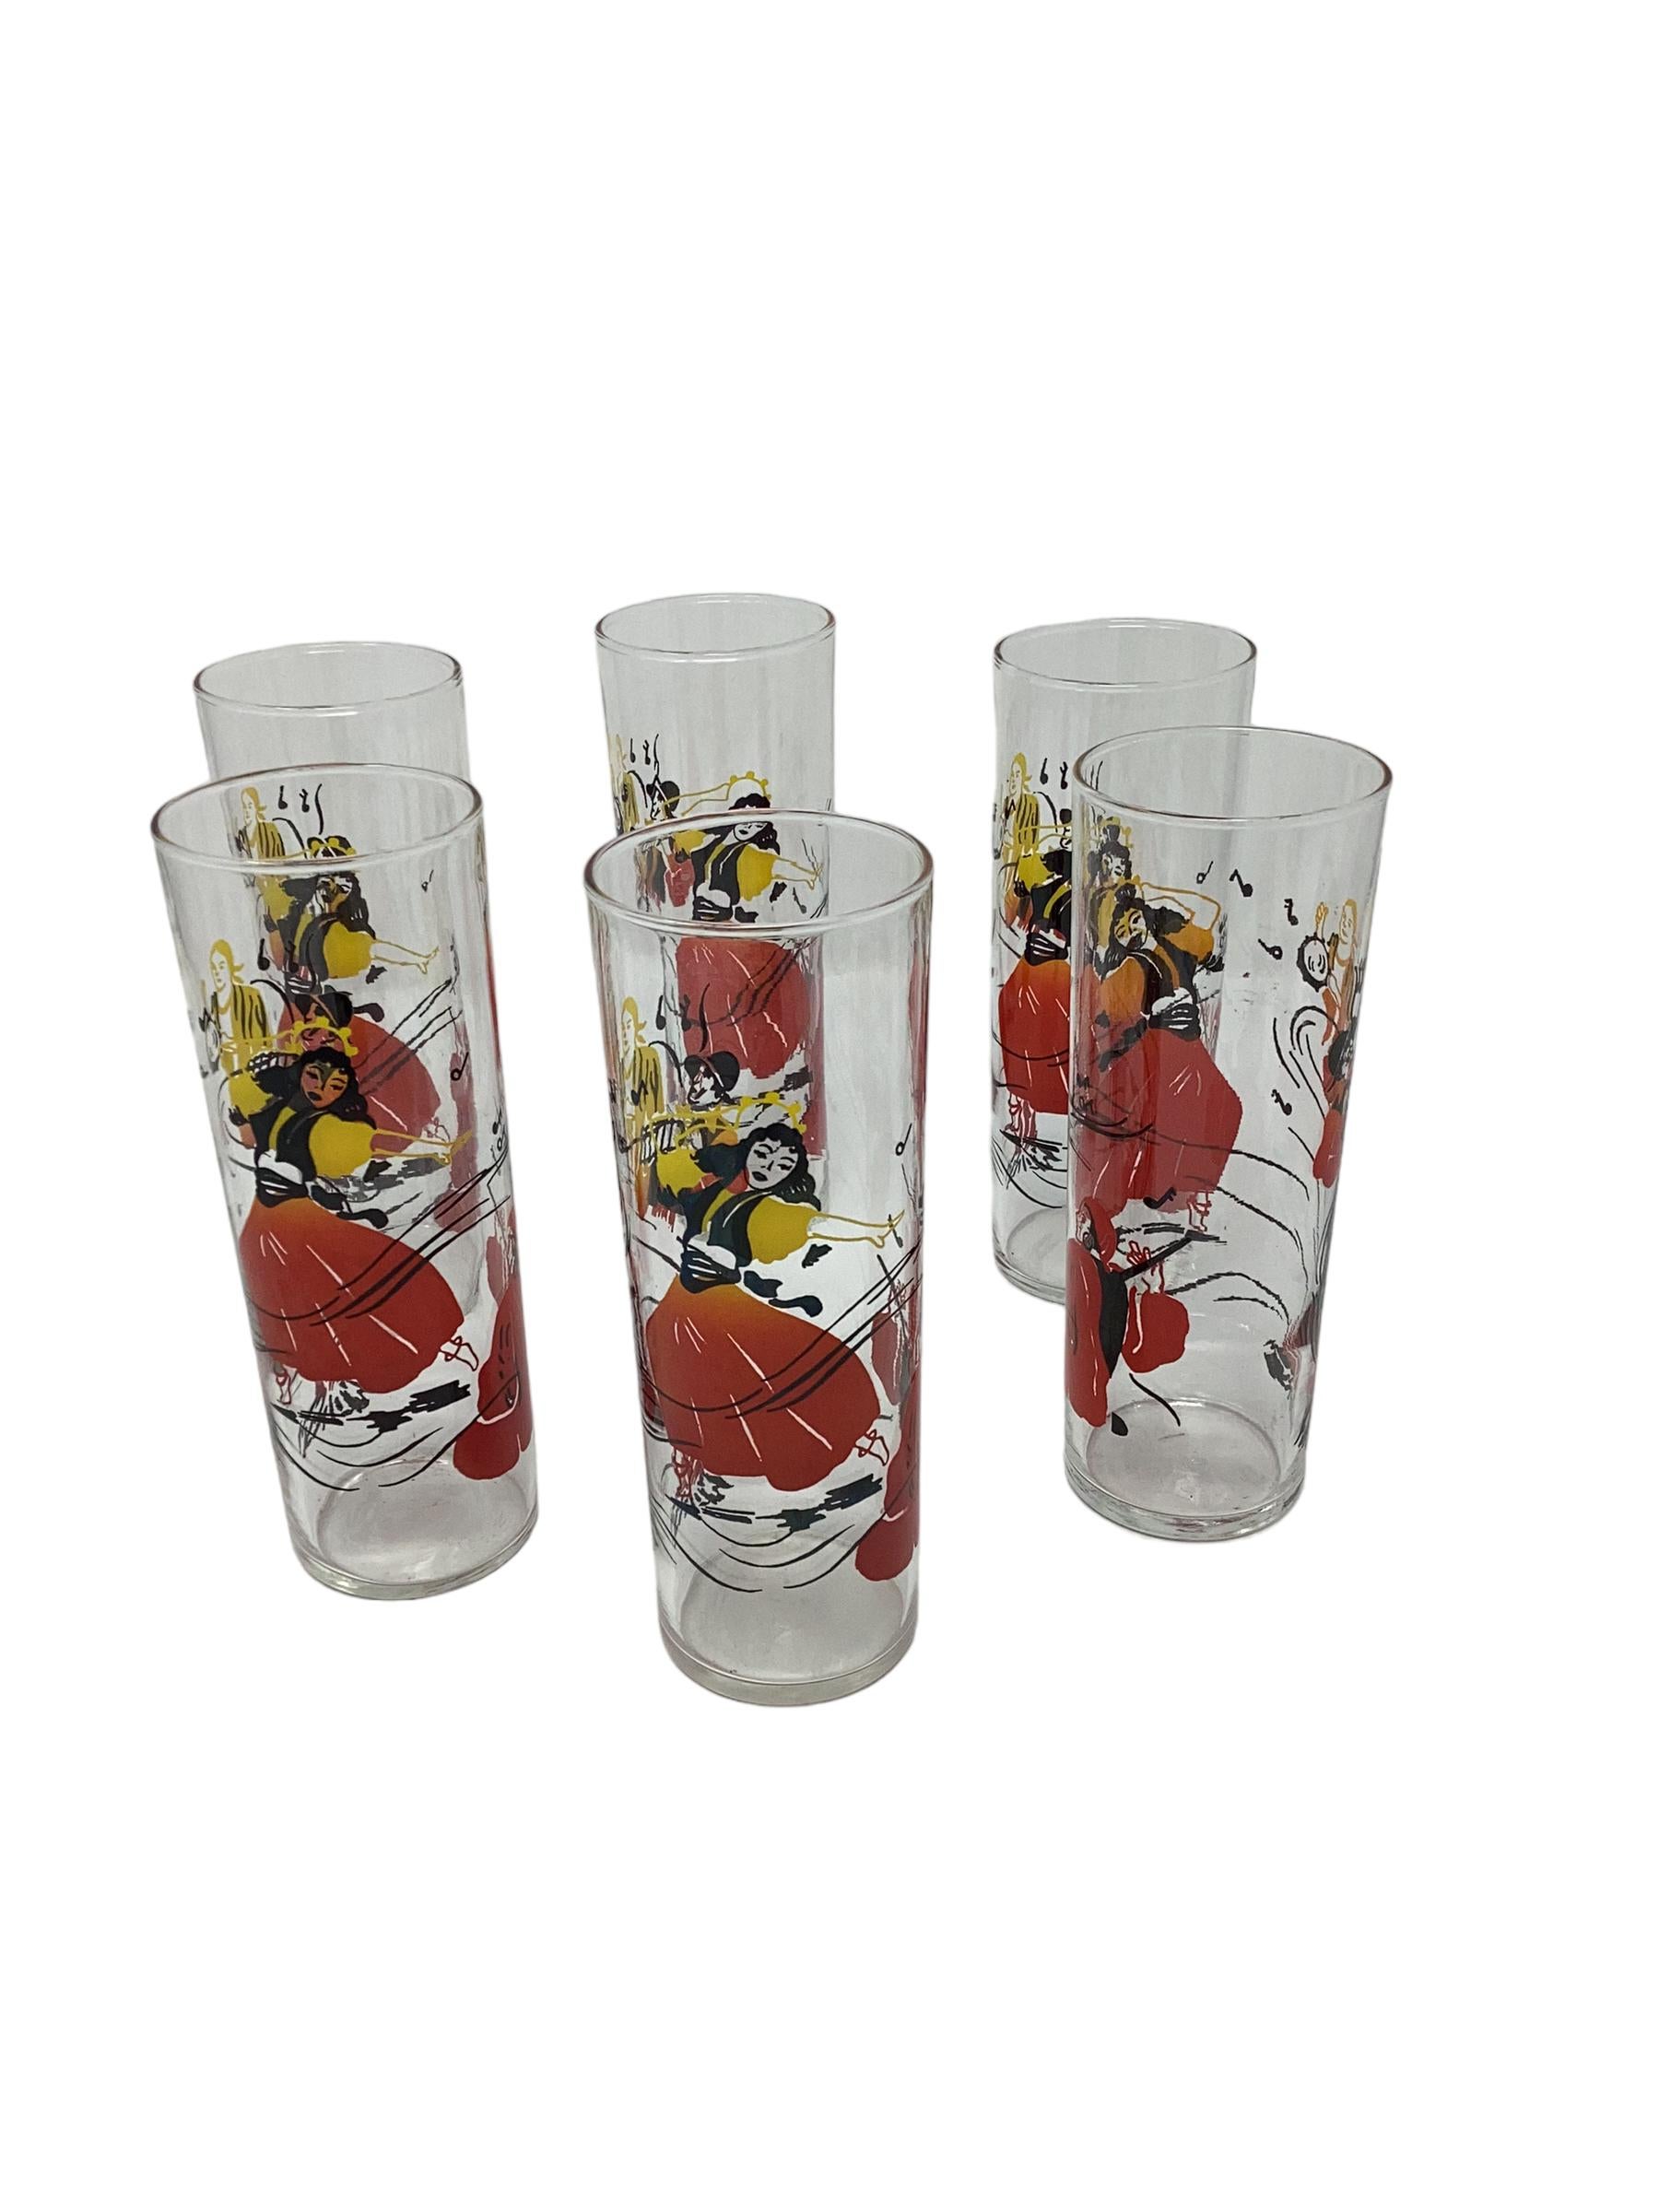 Set of 6 Vintage Federal Glass Tom Collins Flamenco Dancer Glasses. Each glass decorated with a female flamenco dancer dressed in brightly colored red, yellow and orange outfit while a guitar player plays in front of an open fire.